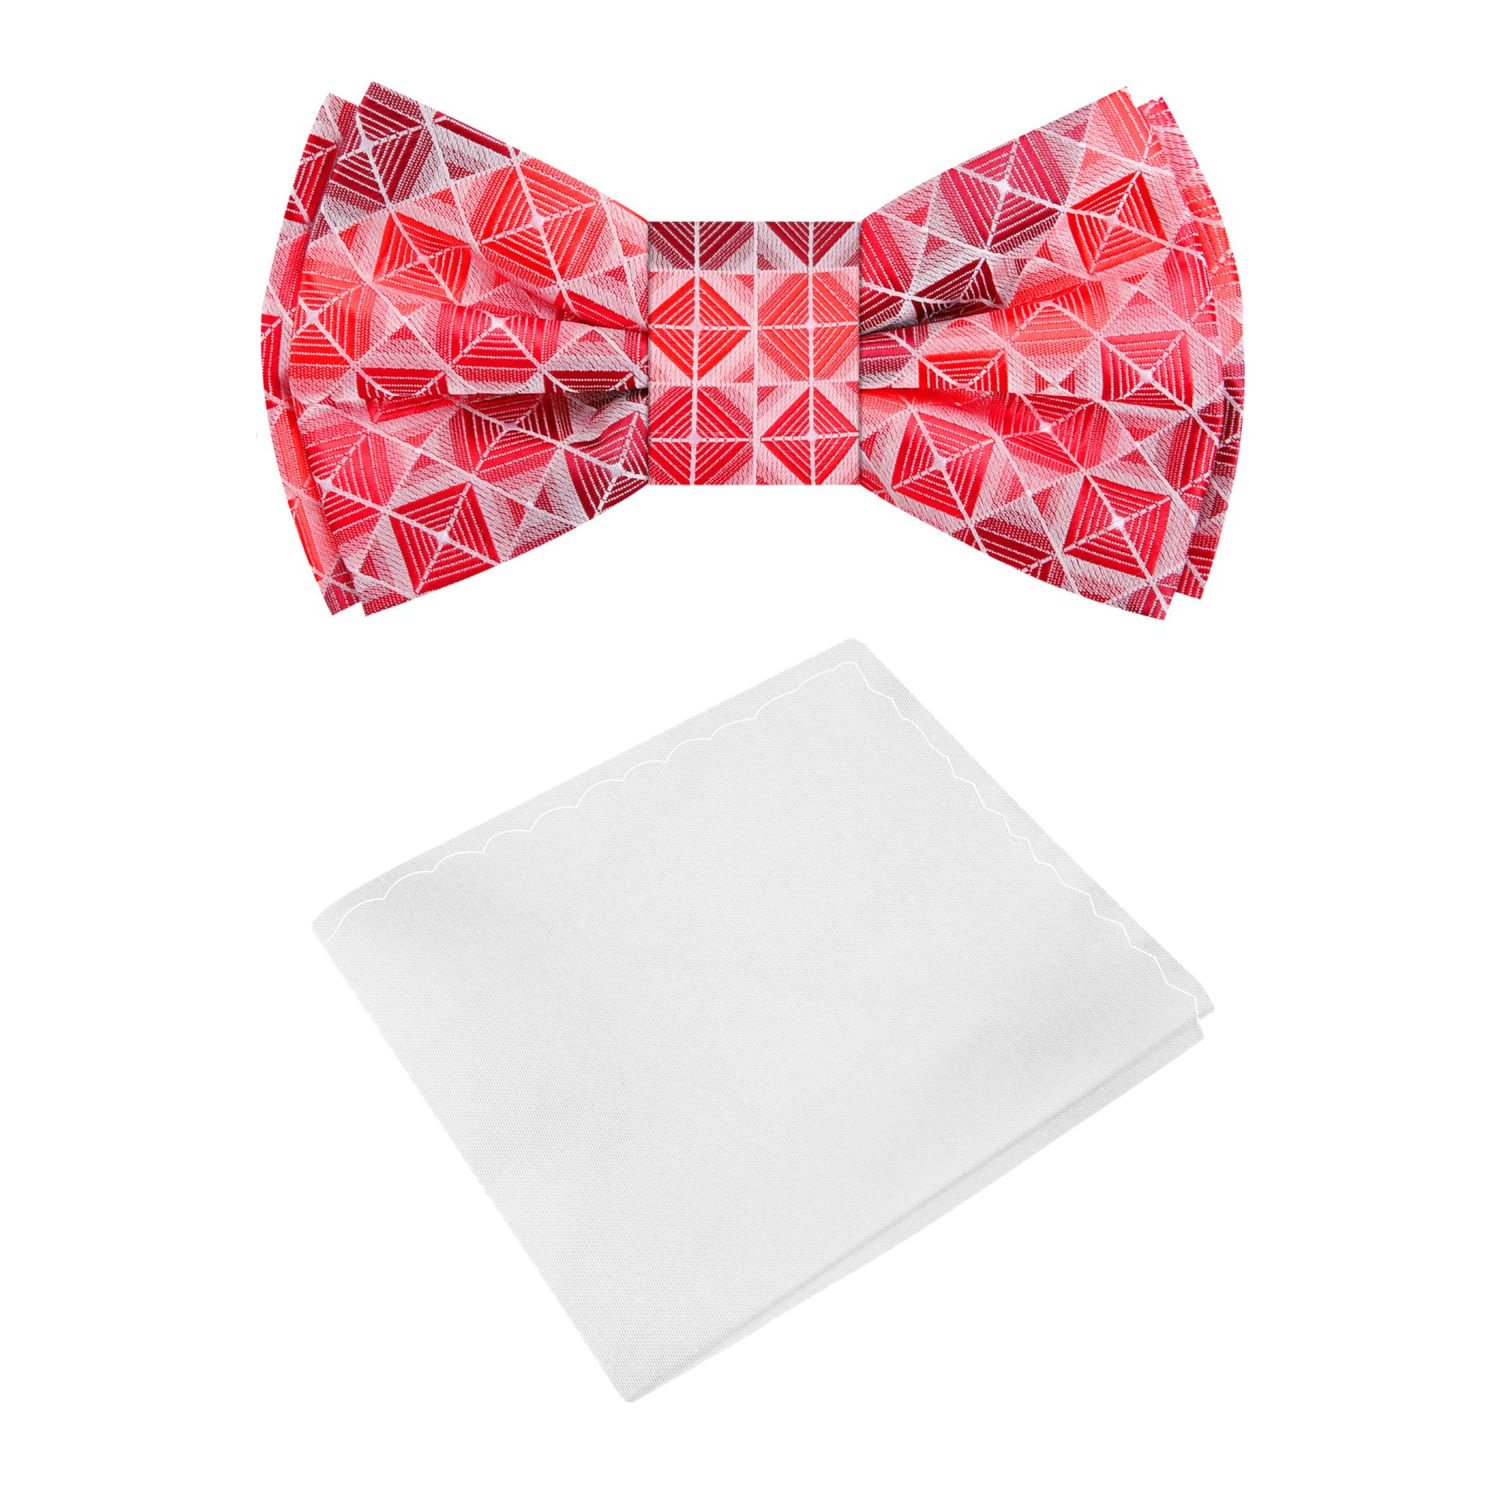 Shades of Red Geometric Bow Tie and White Square 